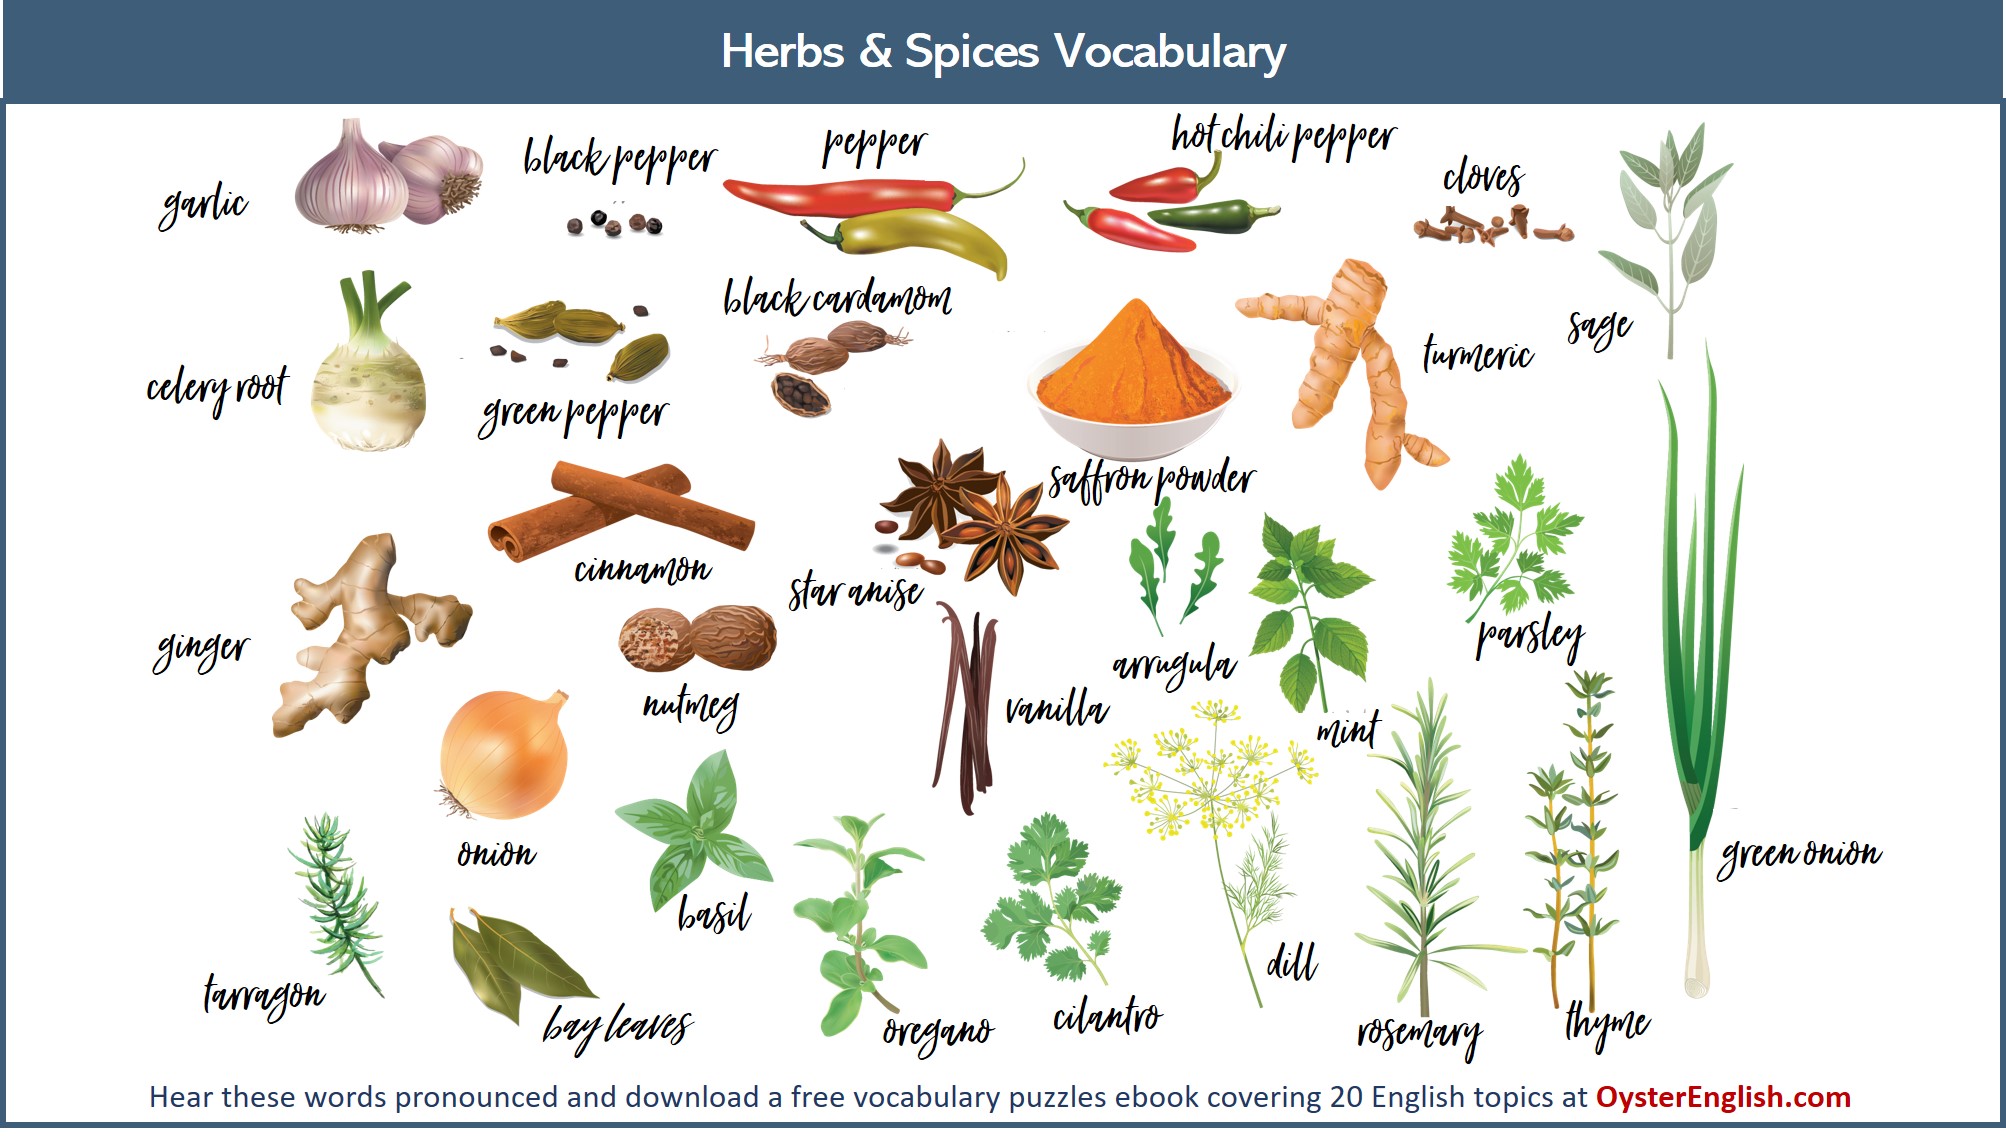 Herbs and Spices Vocabulary
